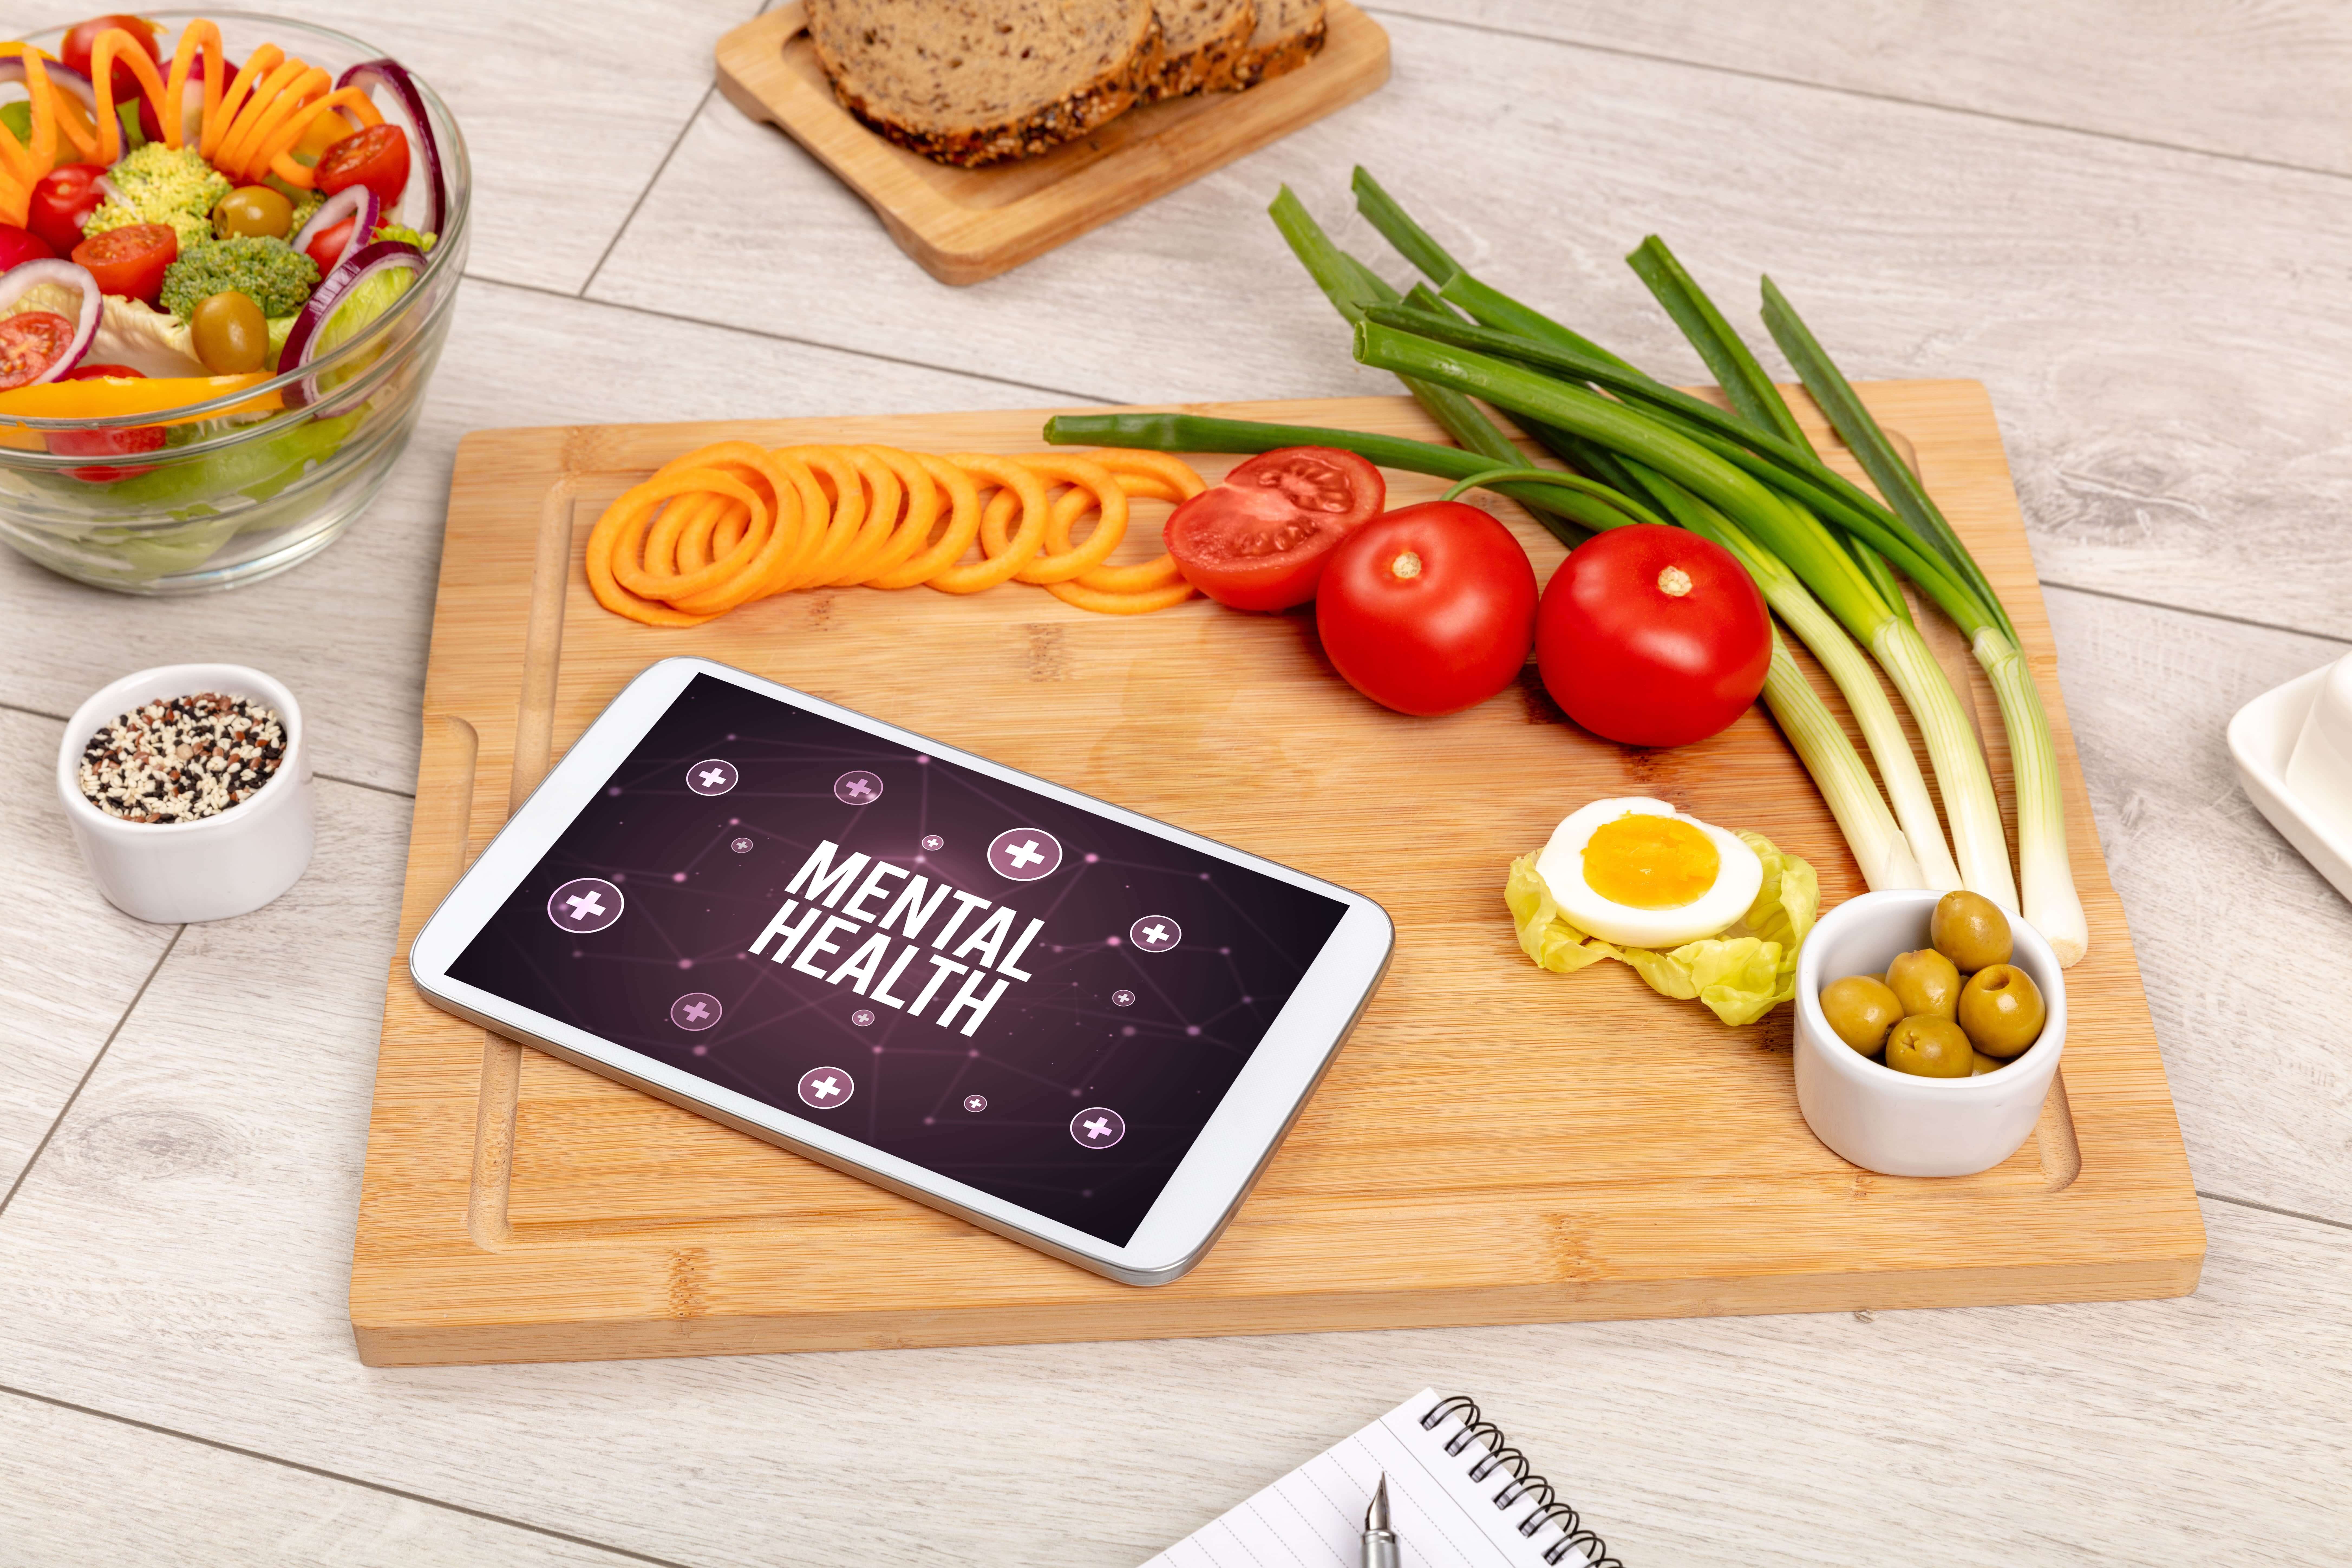 mental health written on tablet next to healthy food